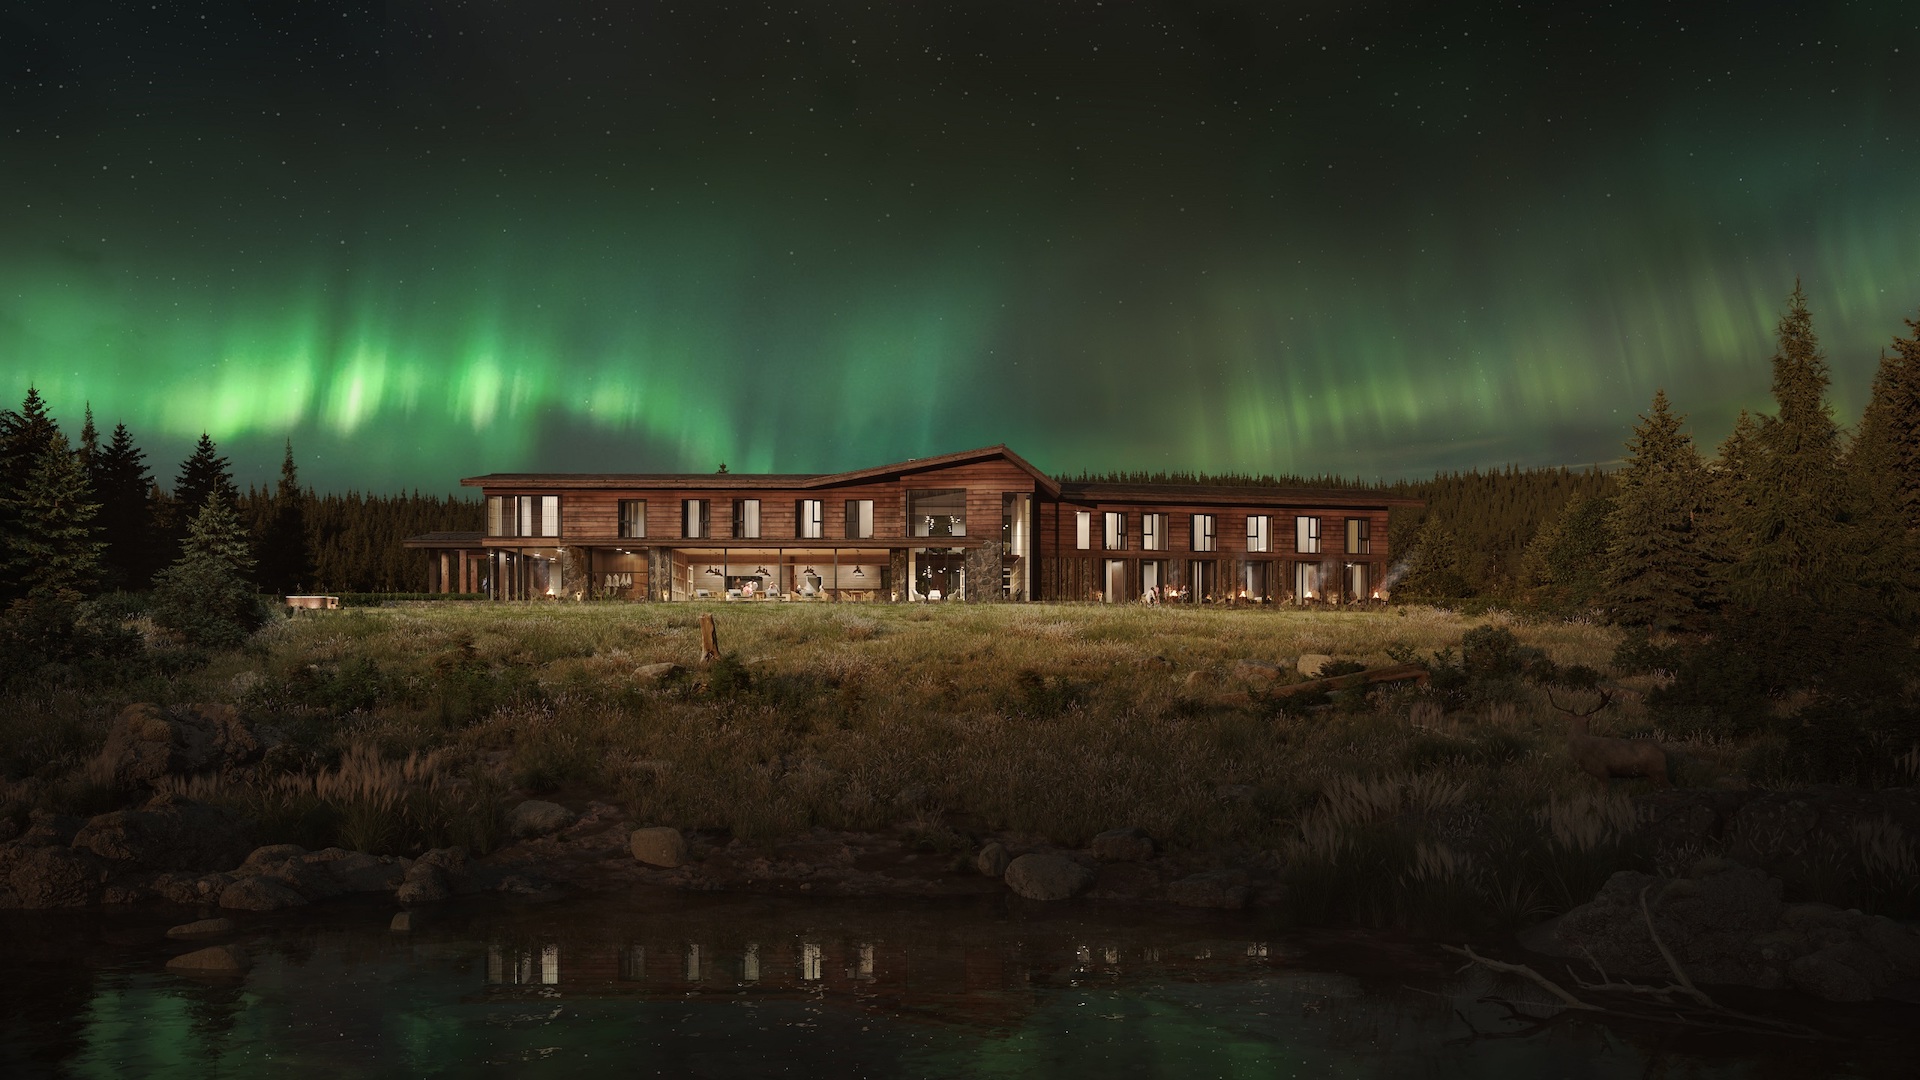 Photorealistic 3D Render with Northern Lights